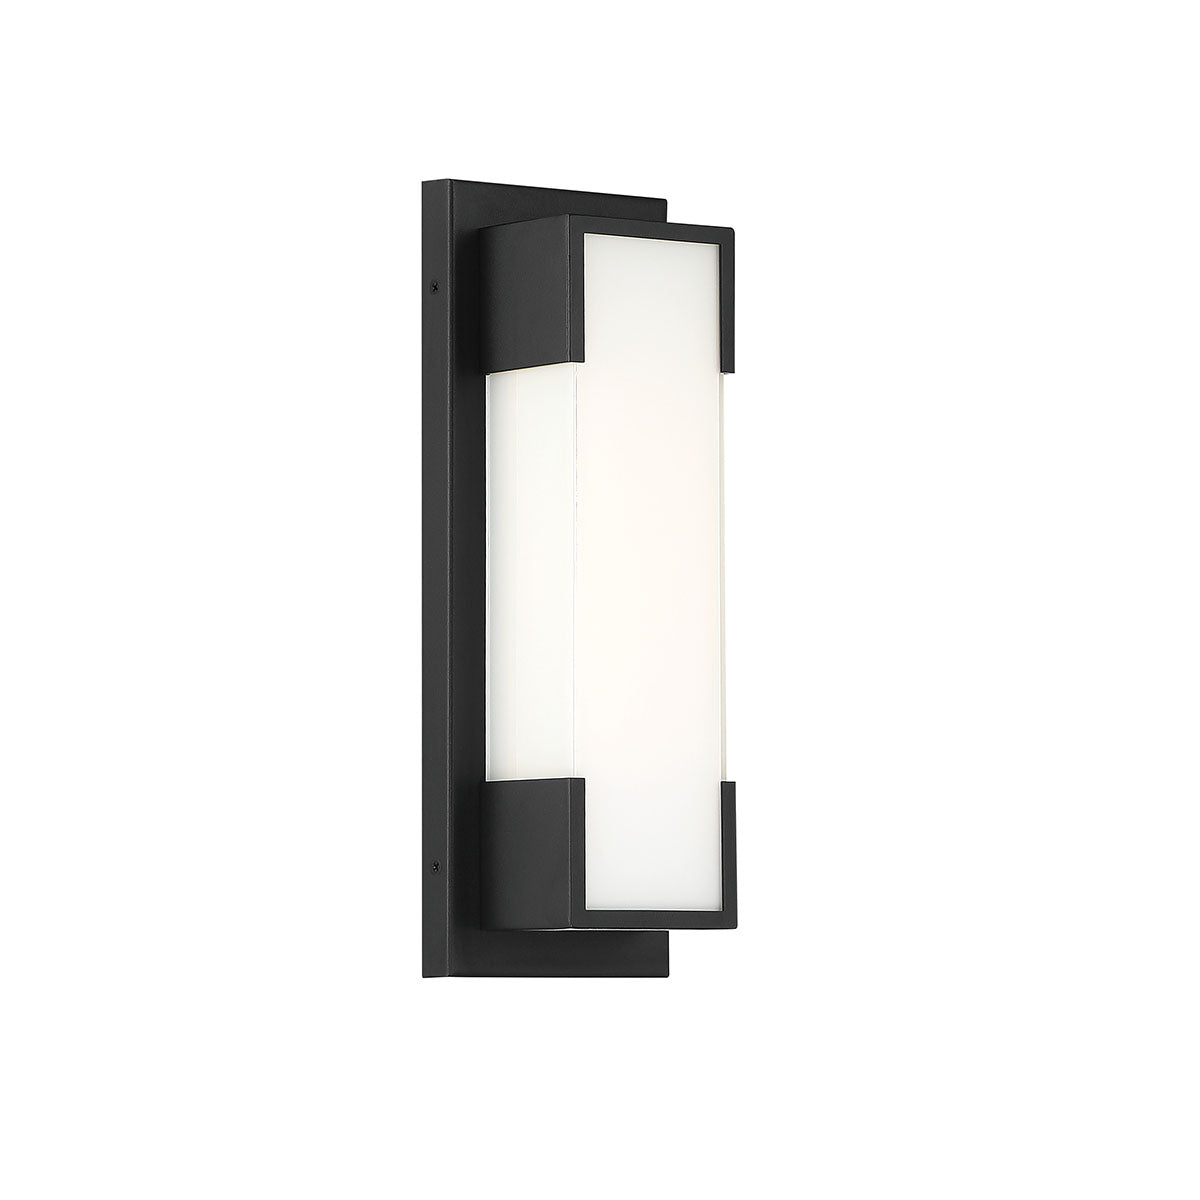 THORNHILL Outdoor sconce Black - 37073-015 INTEGRATED LED | EUROFASE